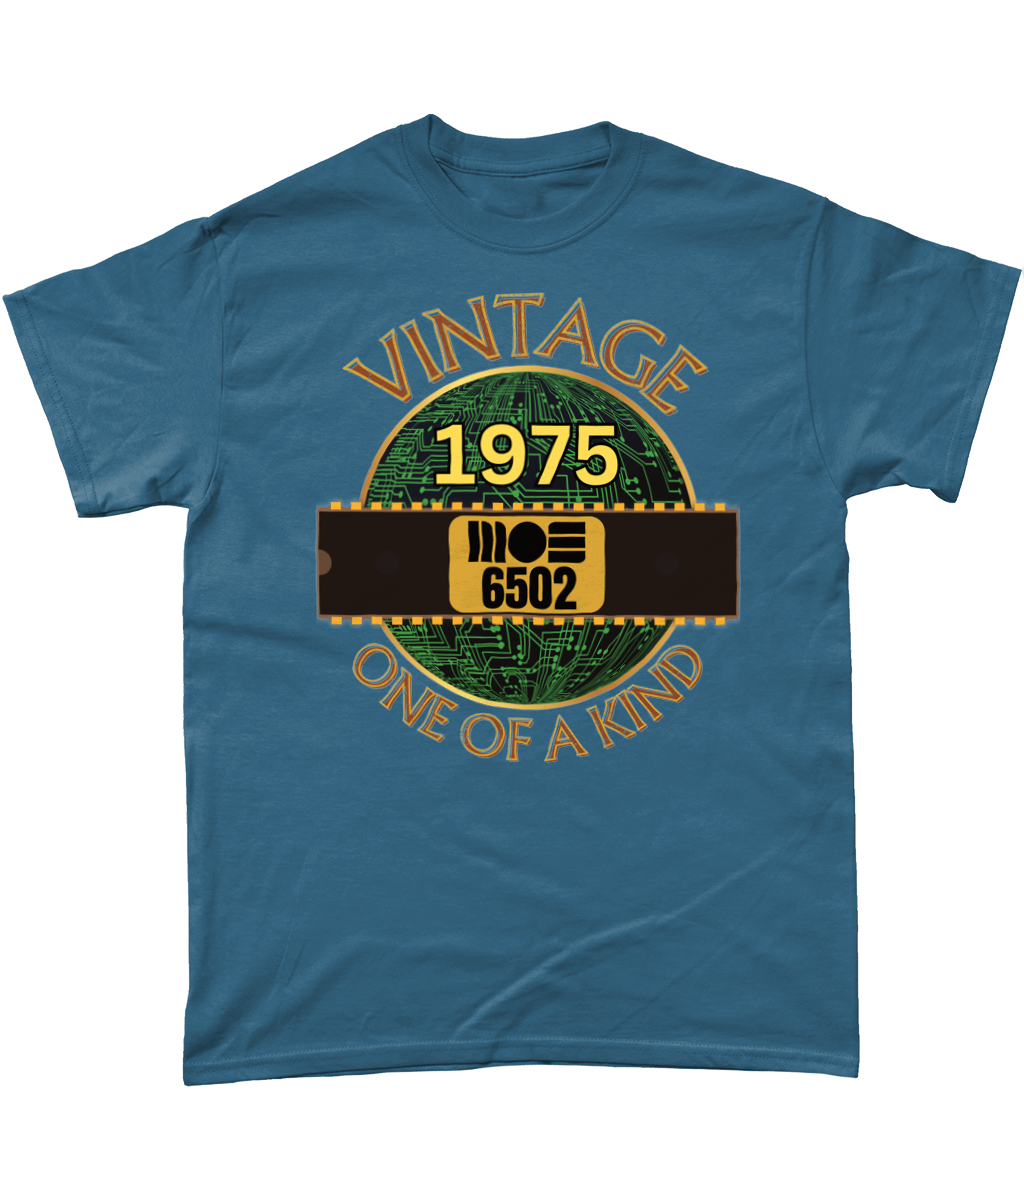 Indigo T-shirt with a gold circle with a basic representation of a circuit board in green and a 40 pin chip across the front with MOS 6502 and 1975 written on it. Vintage one of a kind around the circle